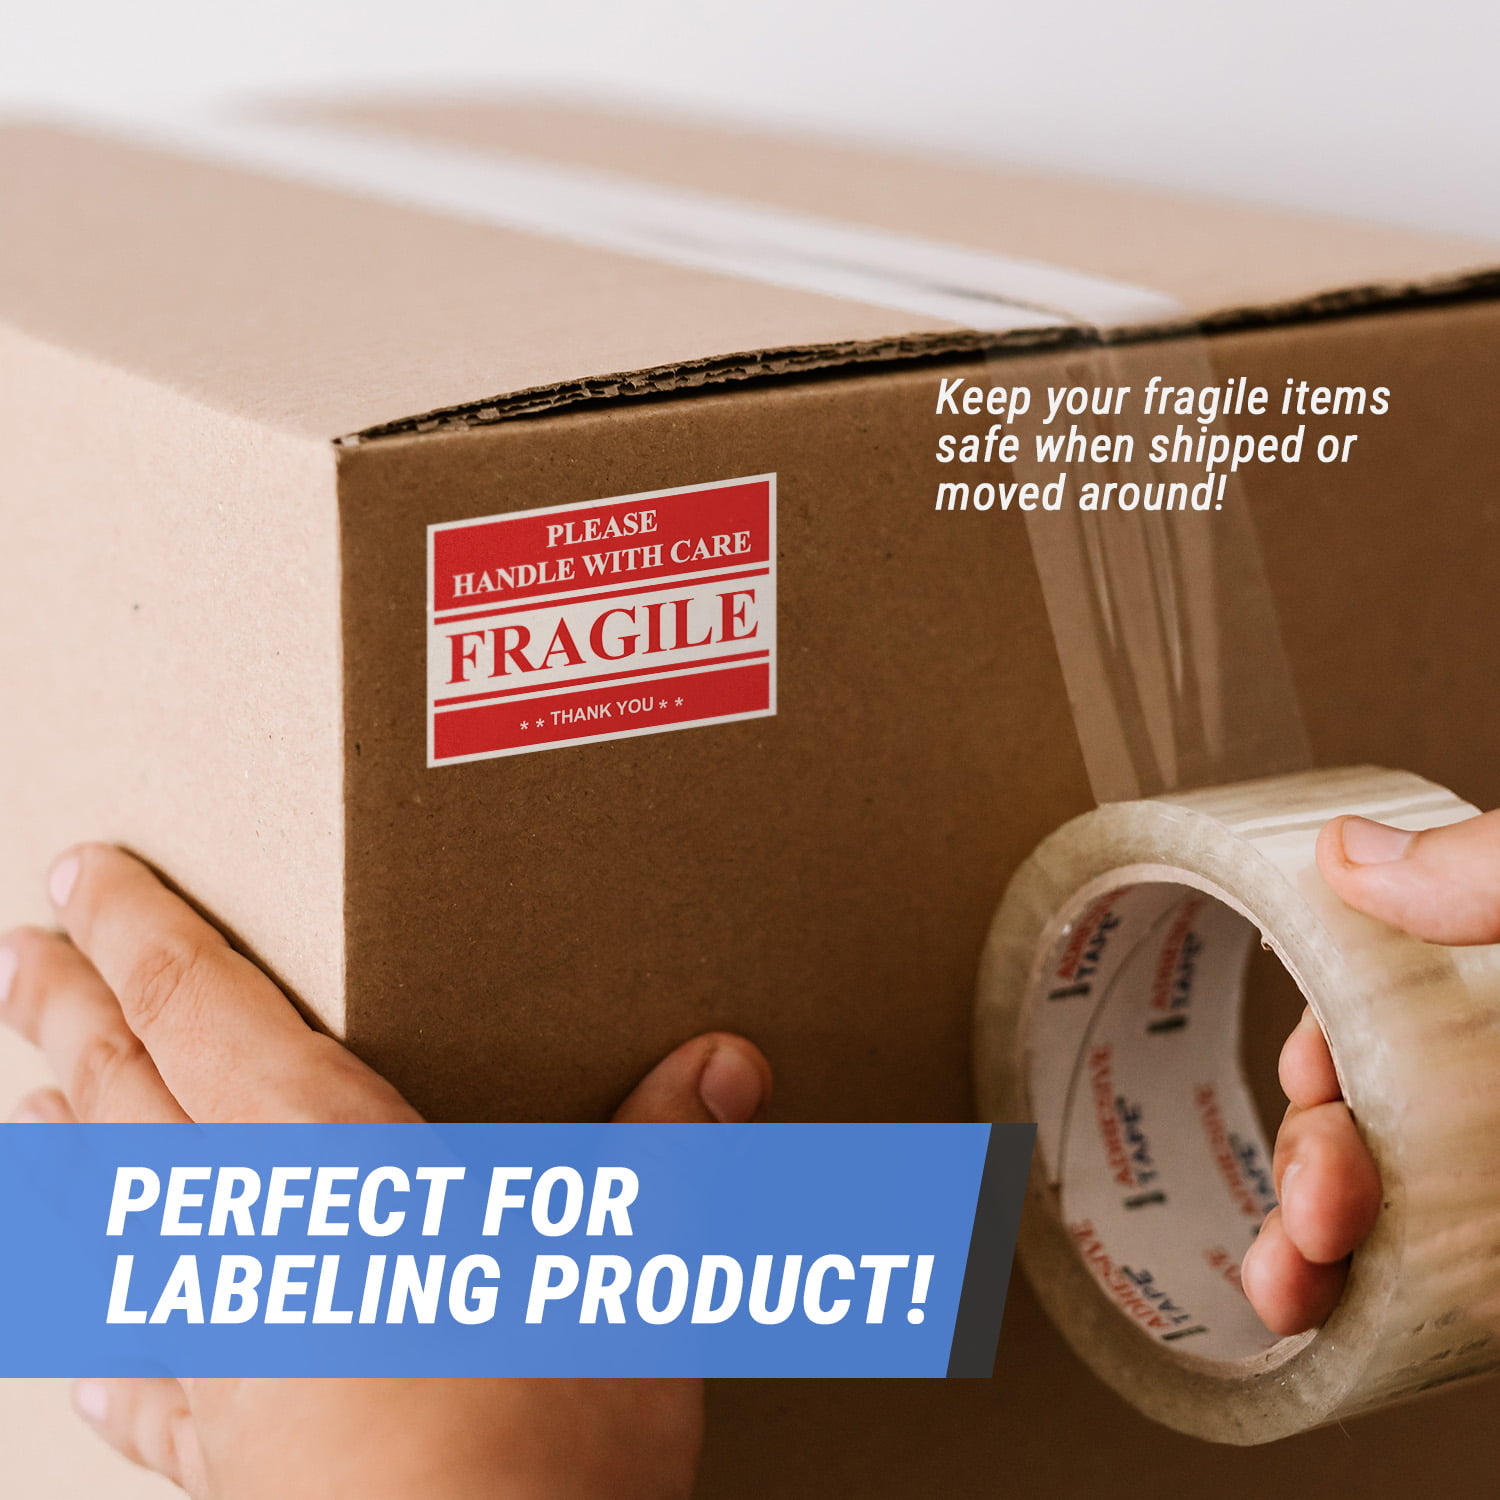 6 Pack Kenco 3 X 2 Fragile Handle with Care Warning Stickers for Shipping and Packing 500 Permanent Adhesive Labels Per Roll 